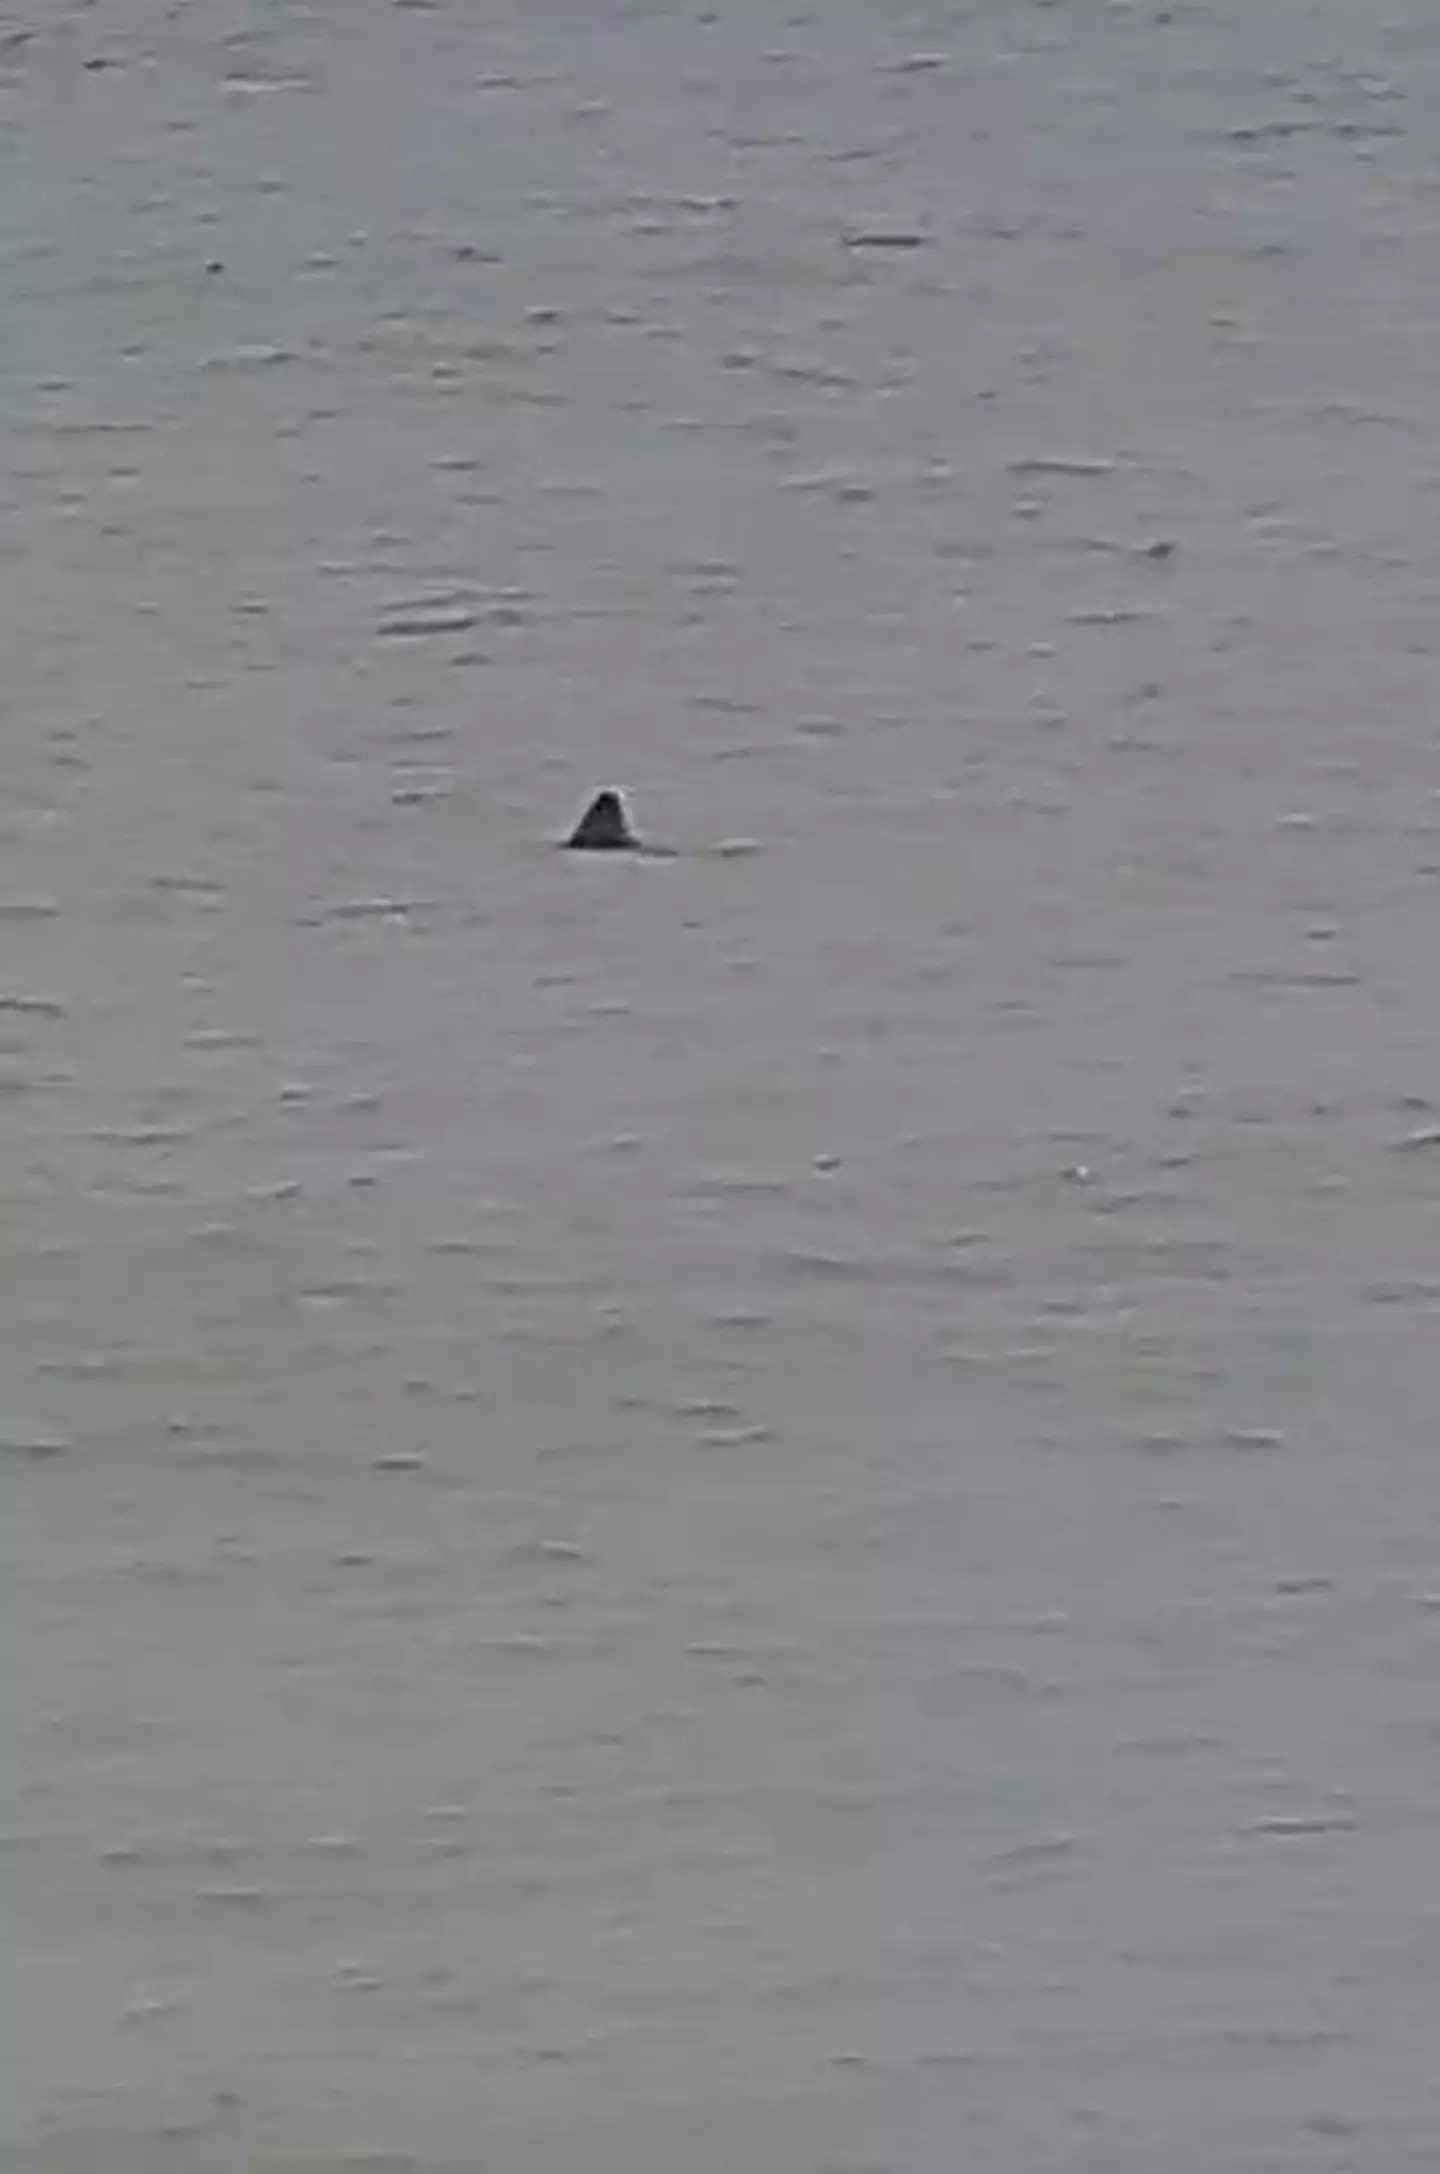 The family spotted what they reckon is the fin of a Great White shark. (Kennedy News and Media)